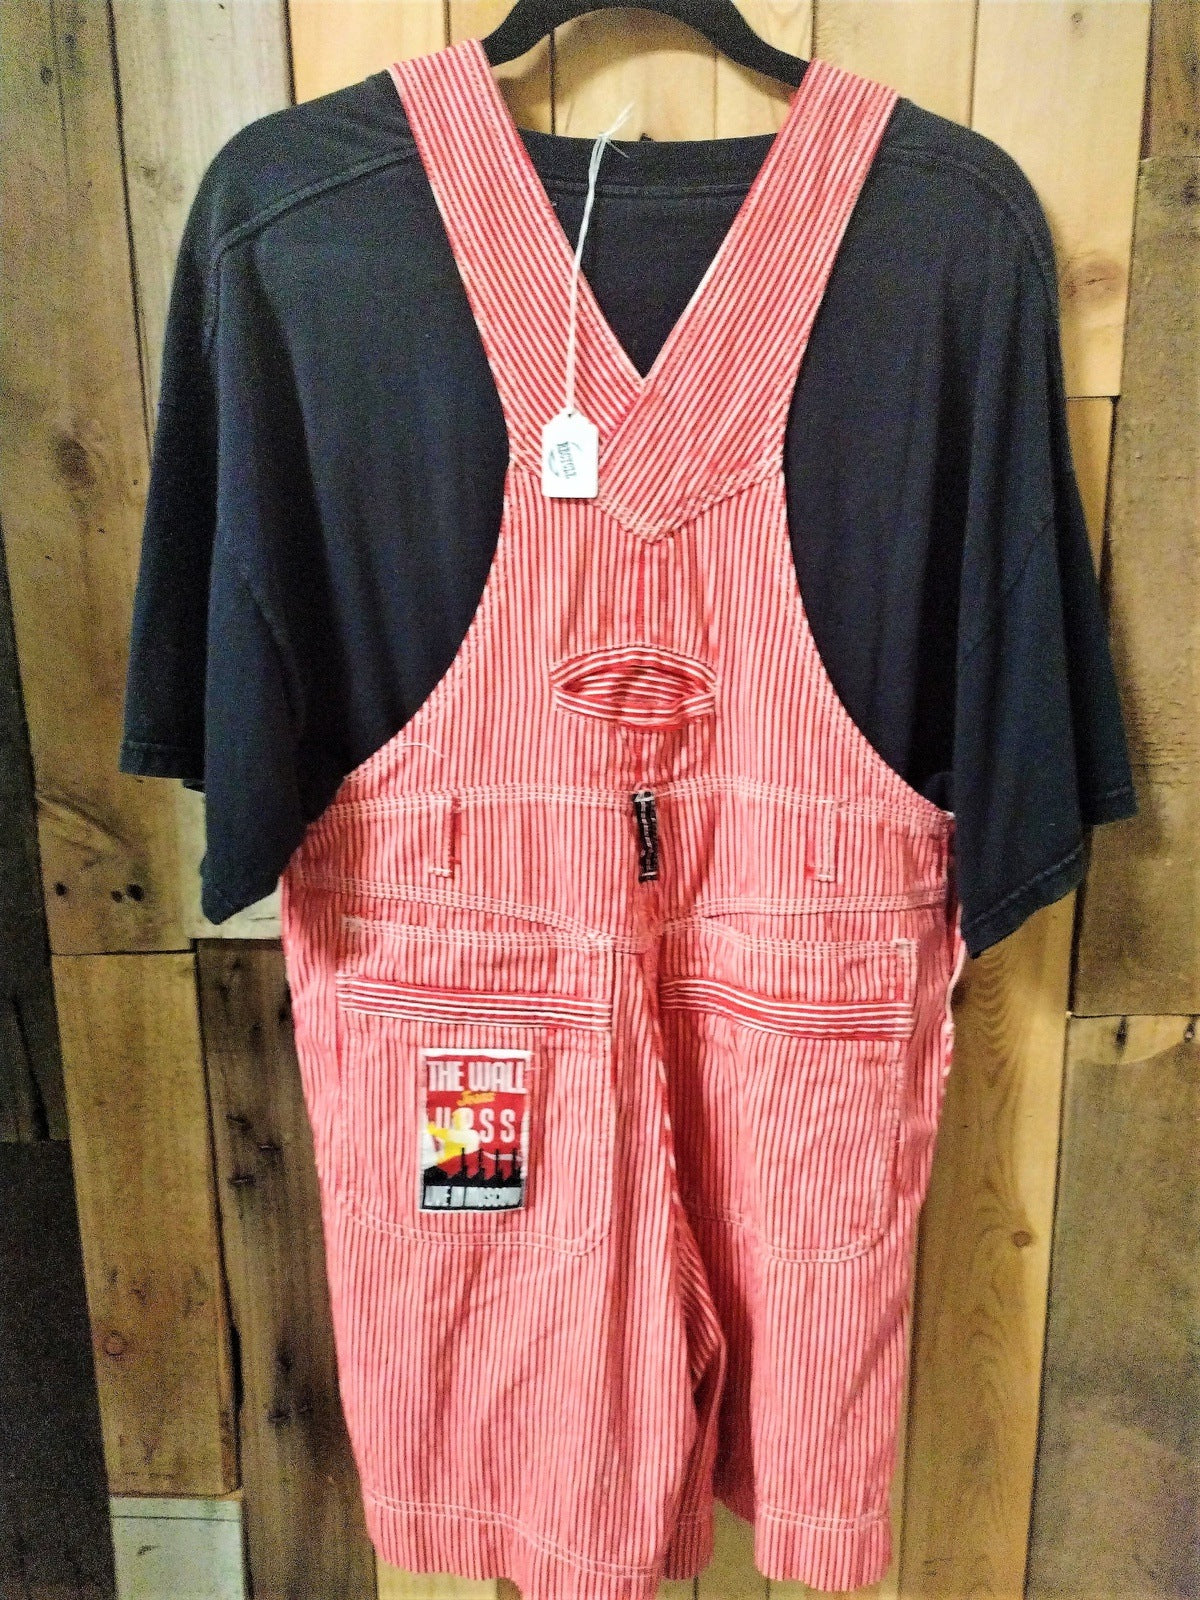 RARE! "The Wall" Jeans Women's Overall Shorts Size Large